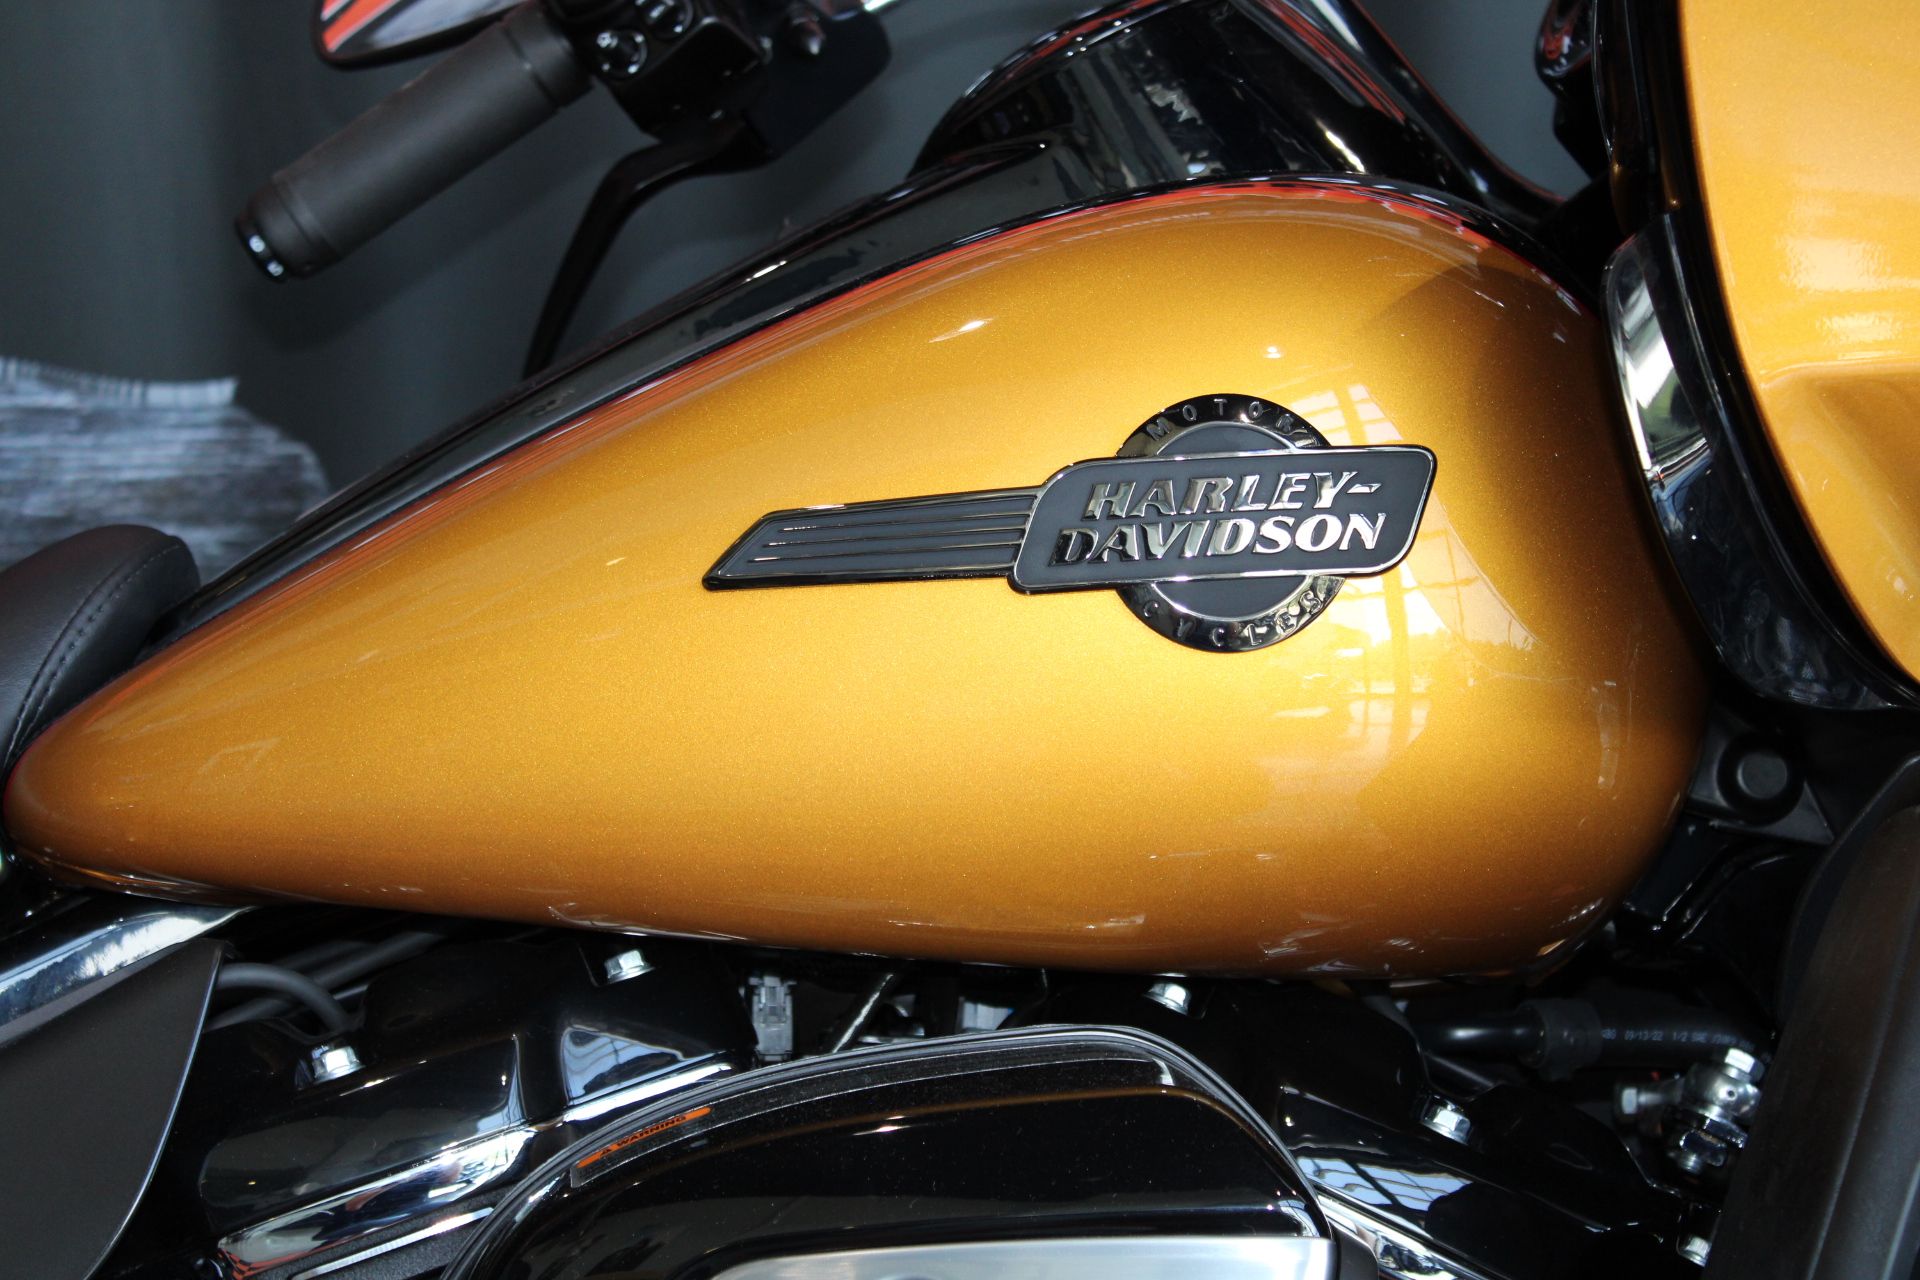 2023 Harley-Davidson Road Glide® Limited in Shorewood, Illinois - Photo 6